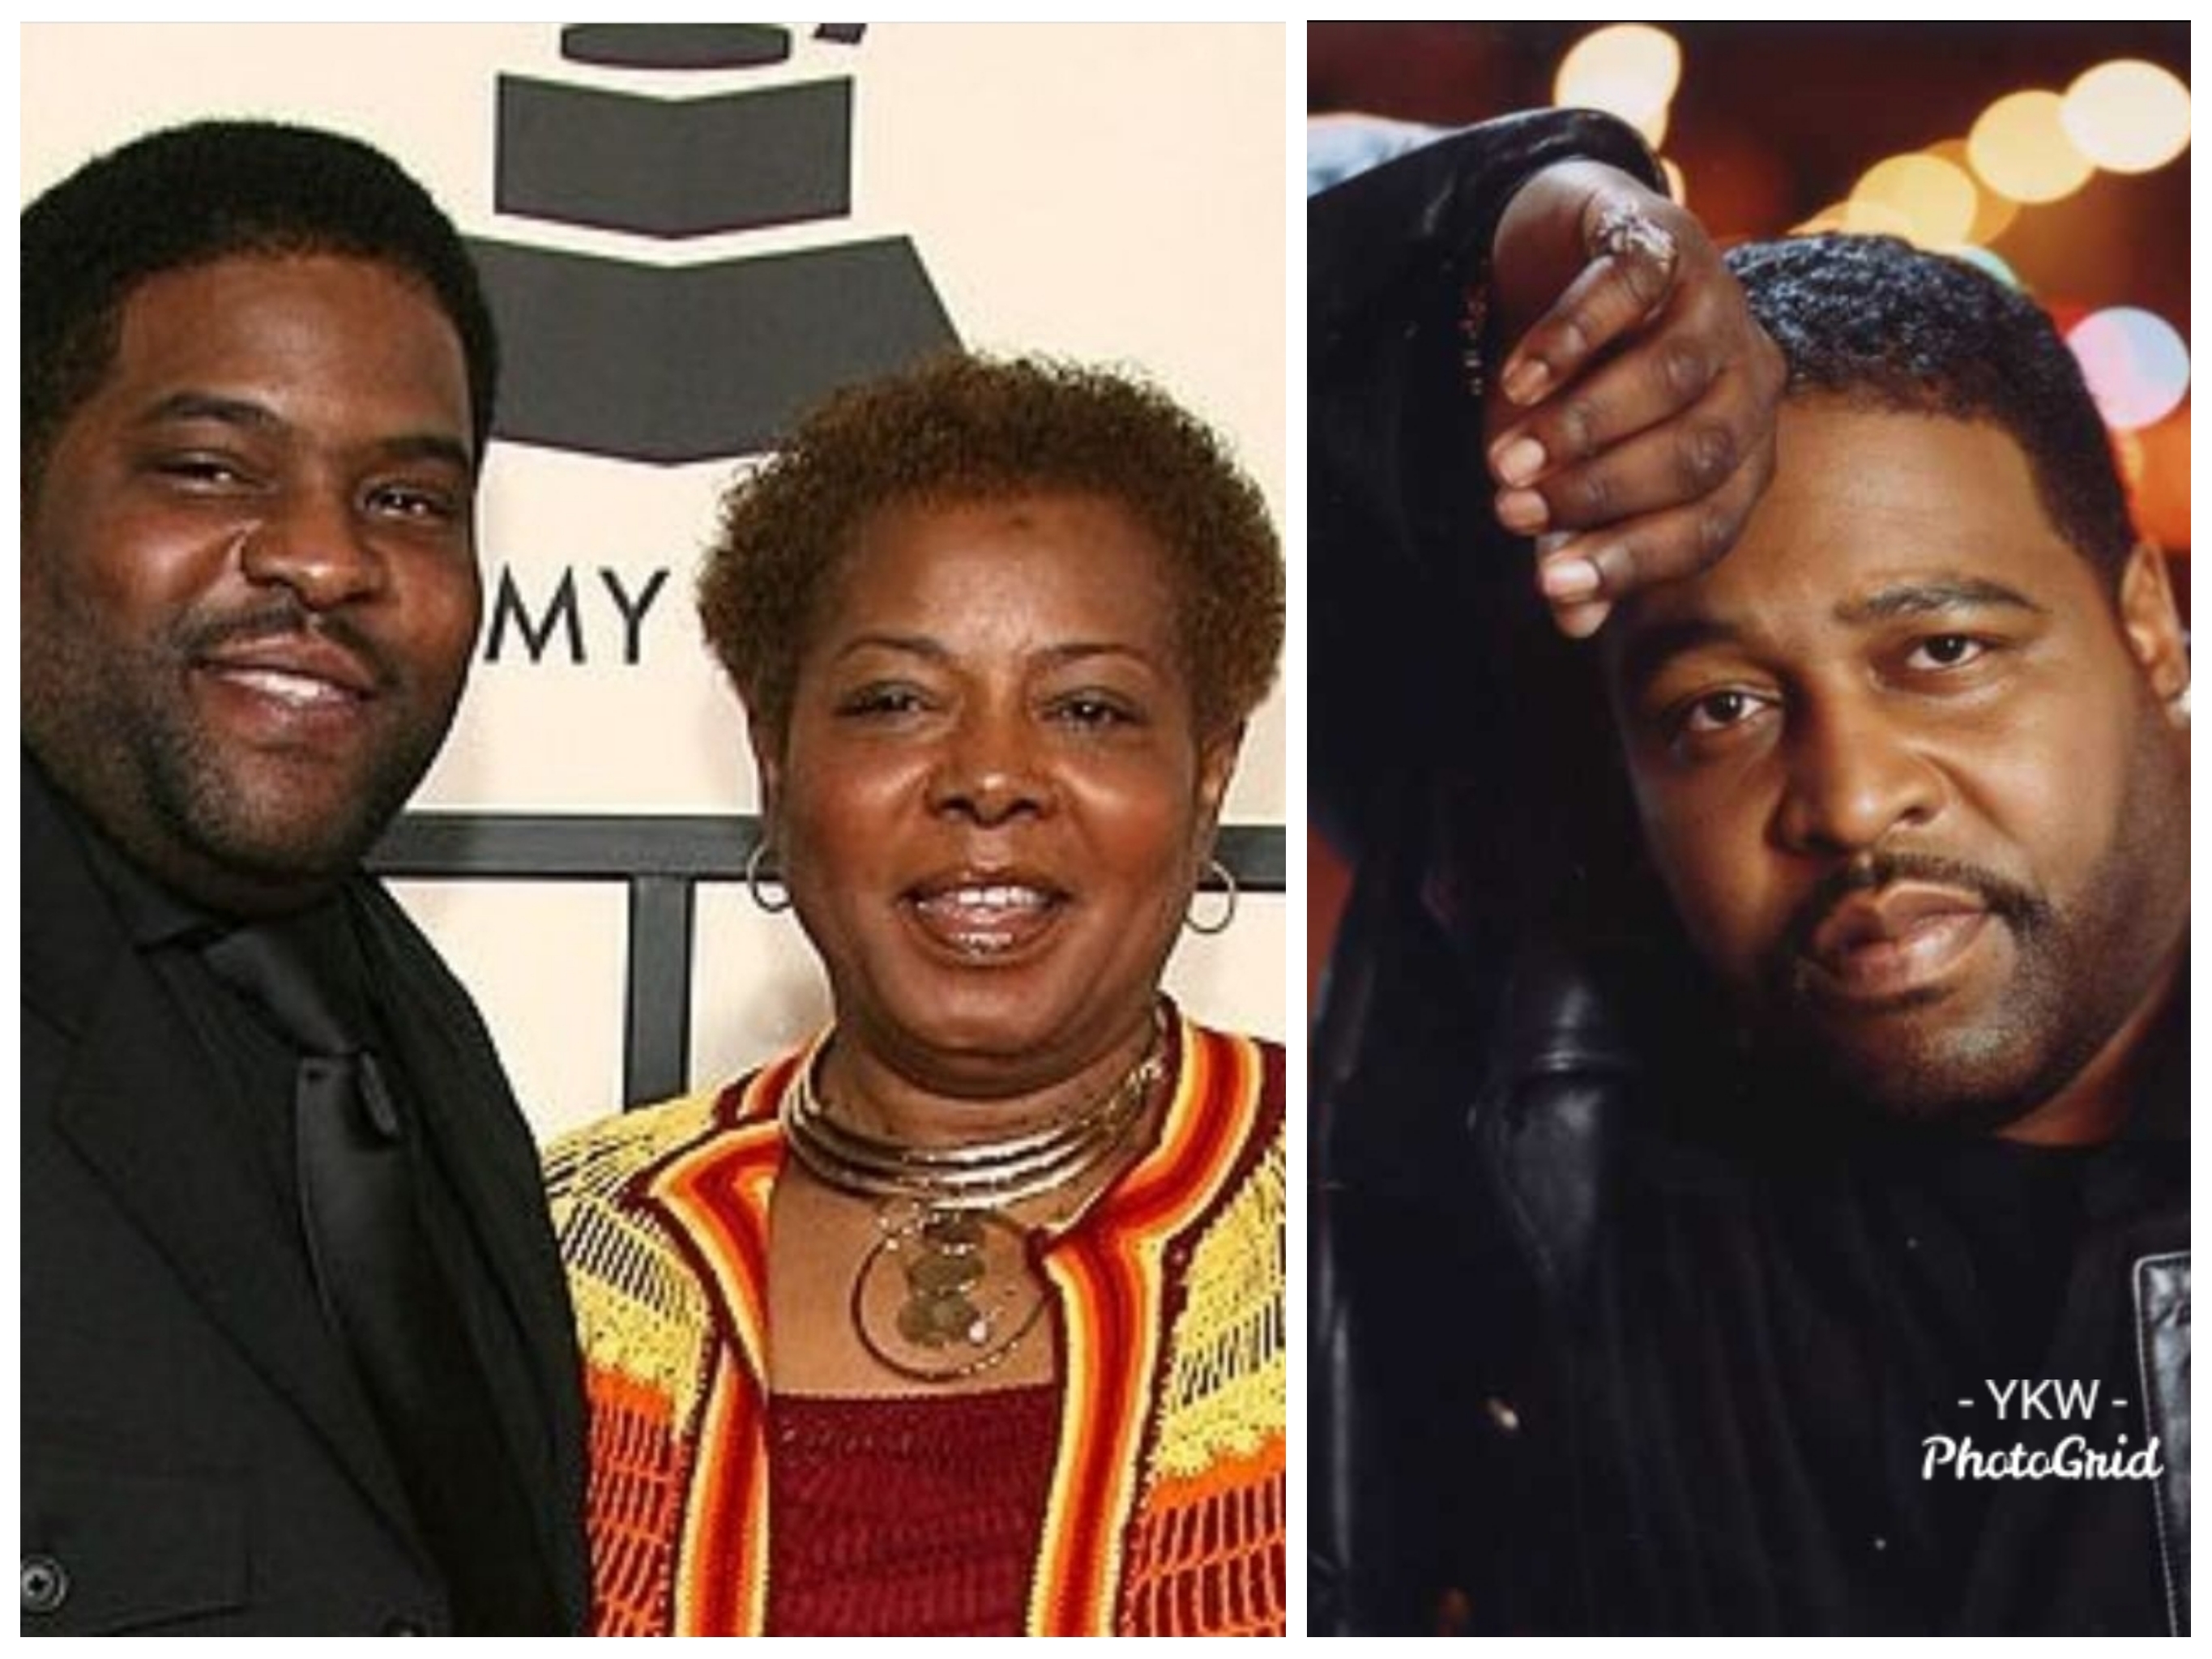 Martha Levert, Mother of R&B Singers Sean And Gerald Levert, Has Passed Away